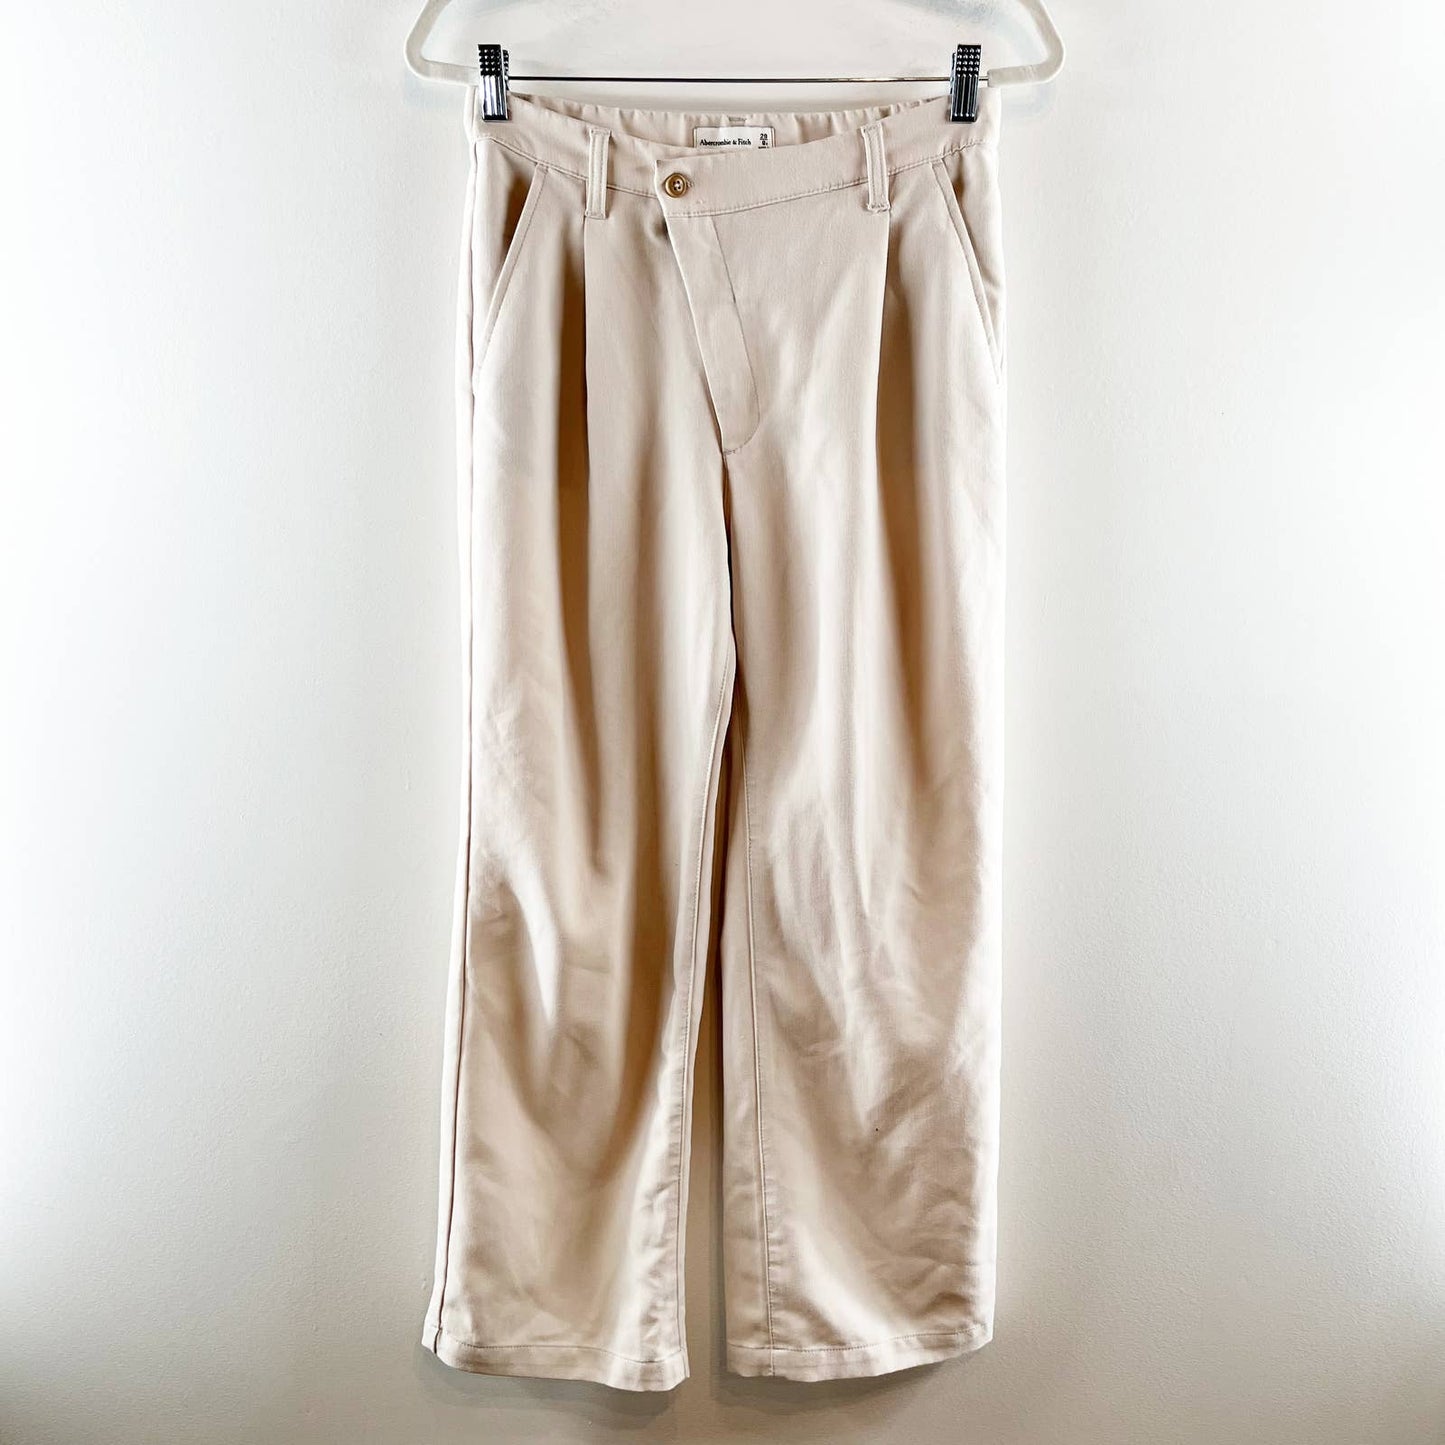 Abercrombie Tailored Relaxed High Rise Crossover Waistband Trouser Pants Tan 8 P